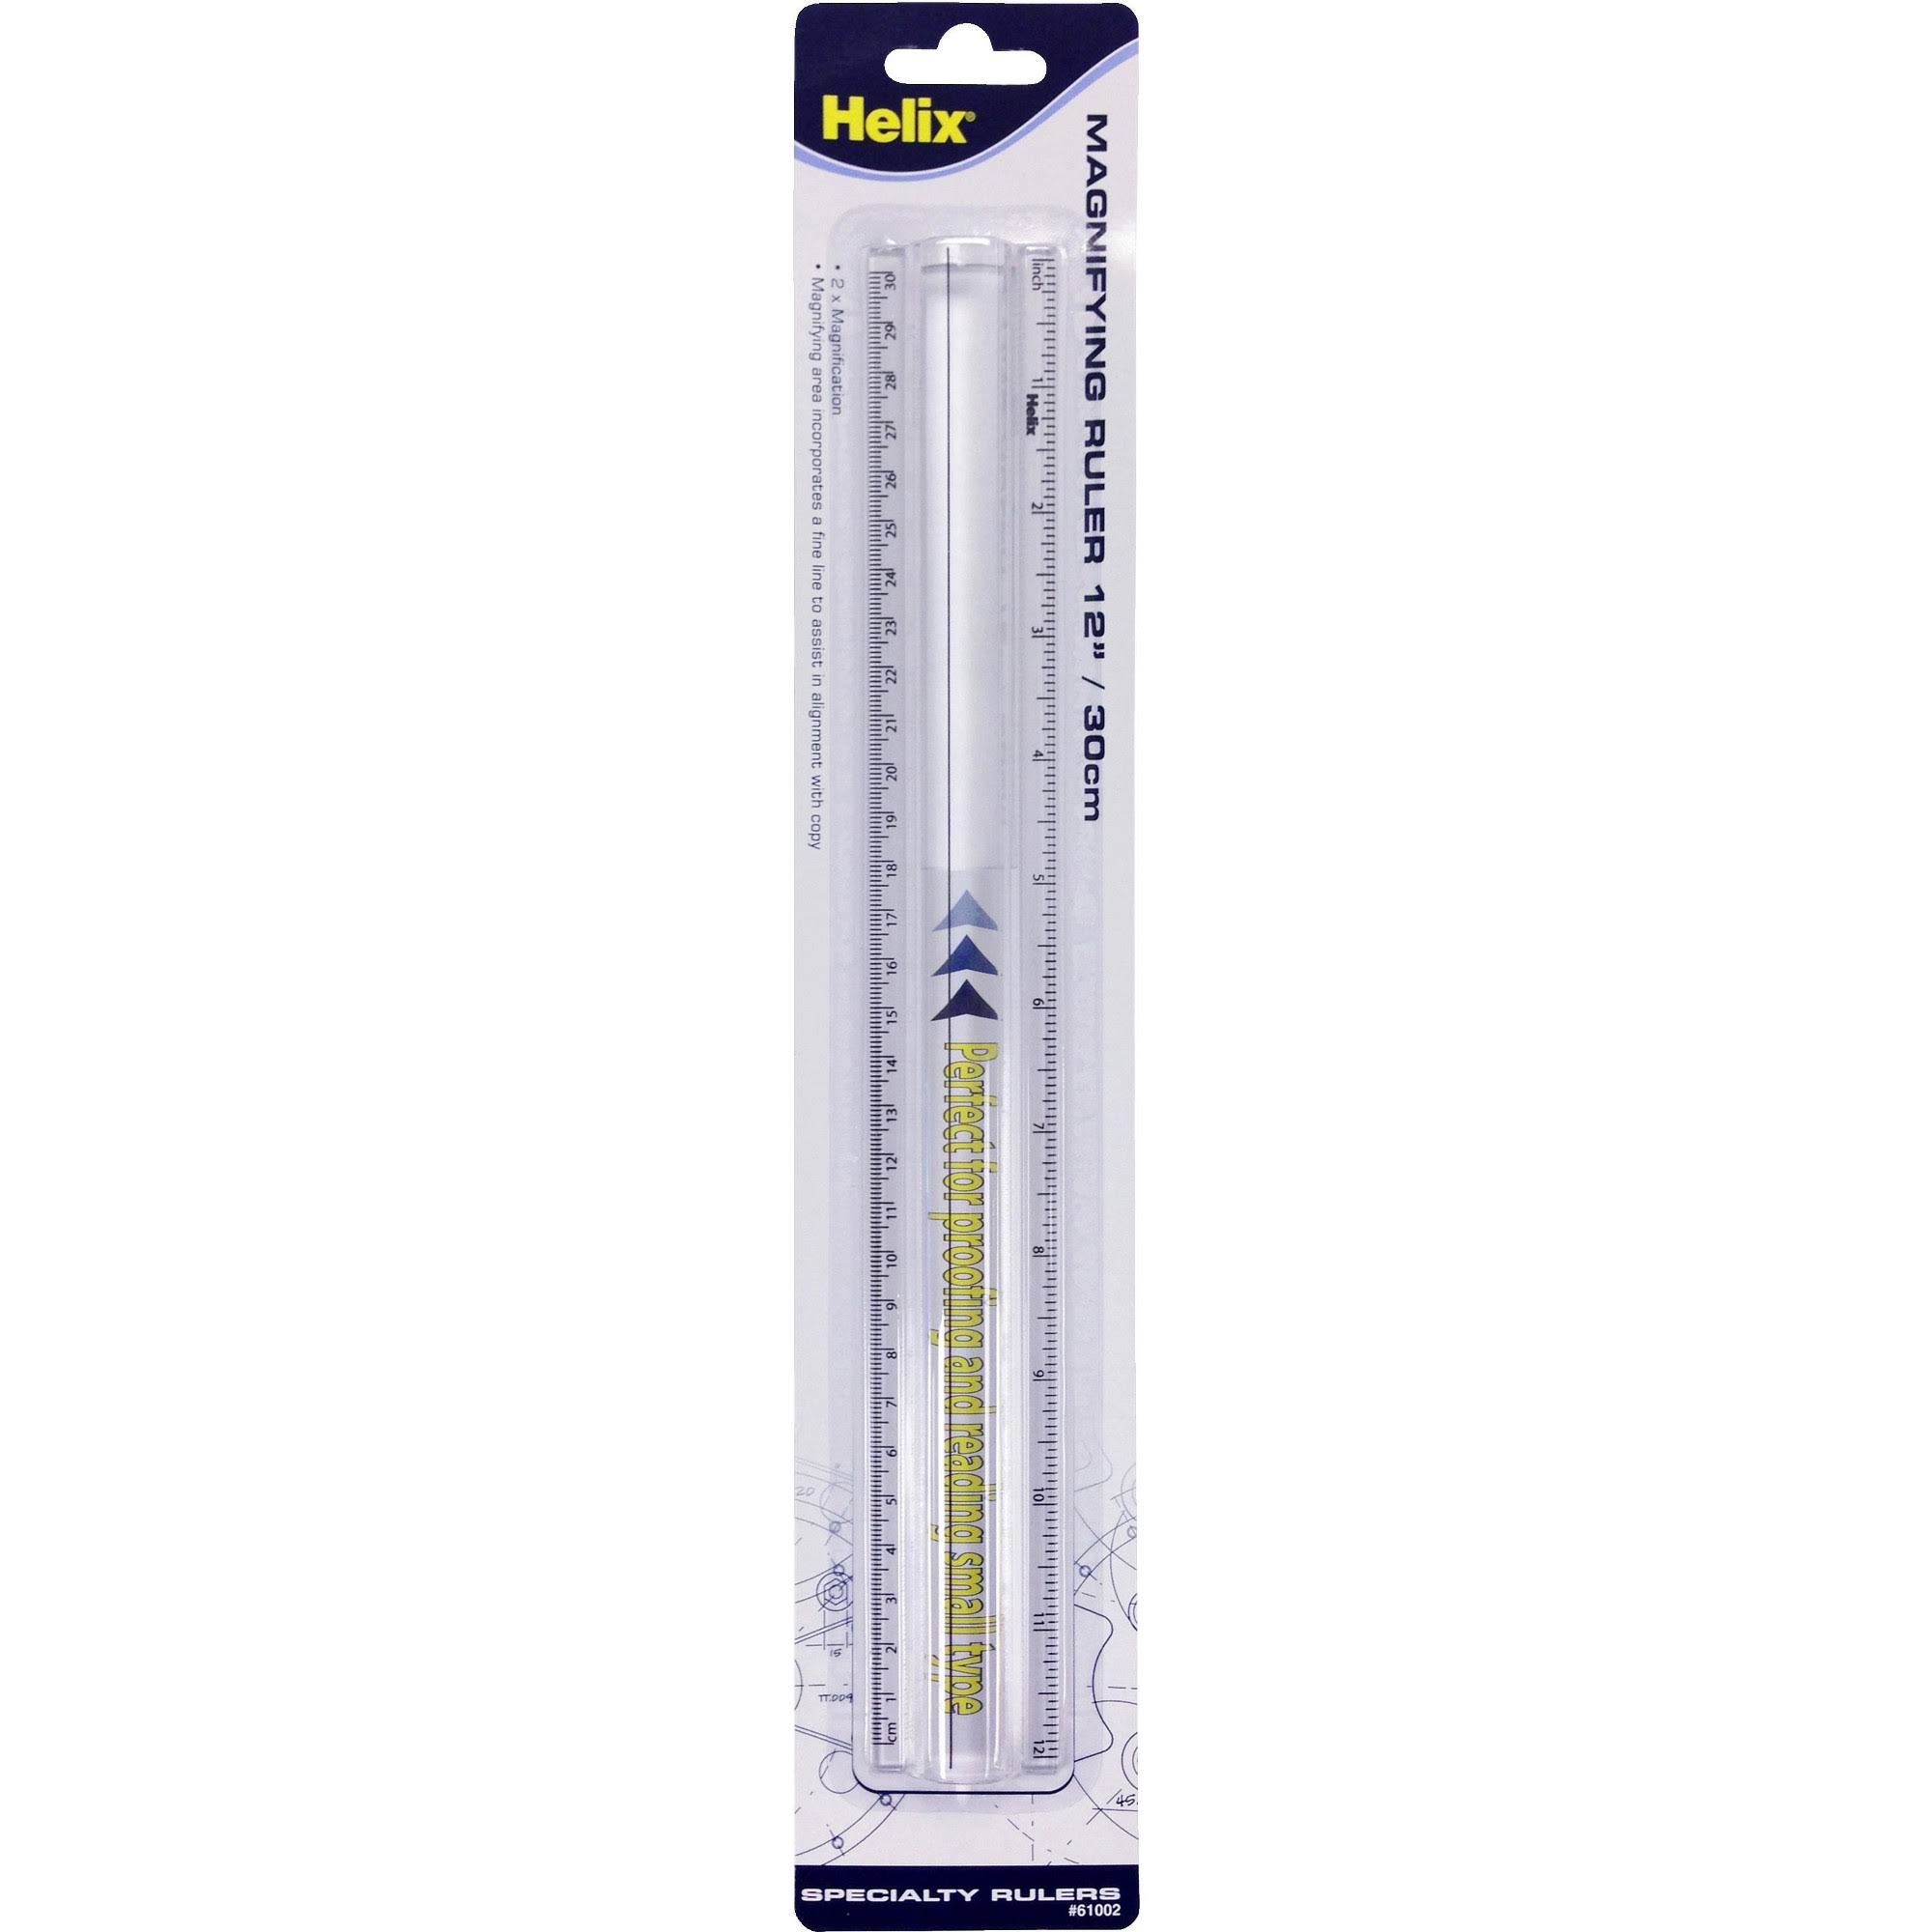 Helix Clear 2X Magnifier Ruler - 12"